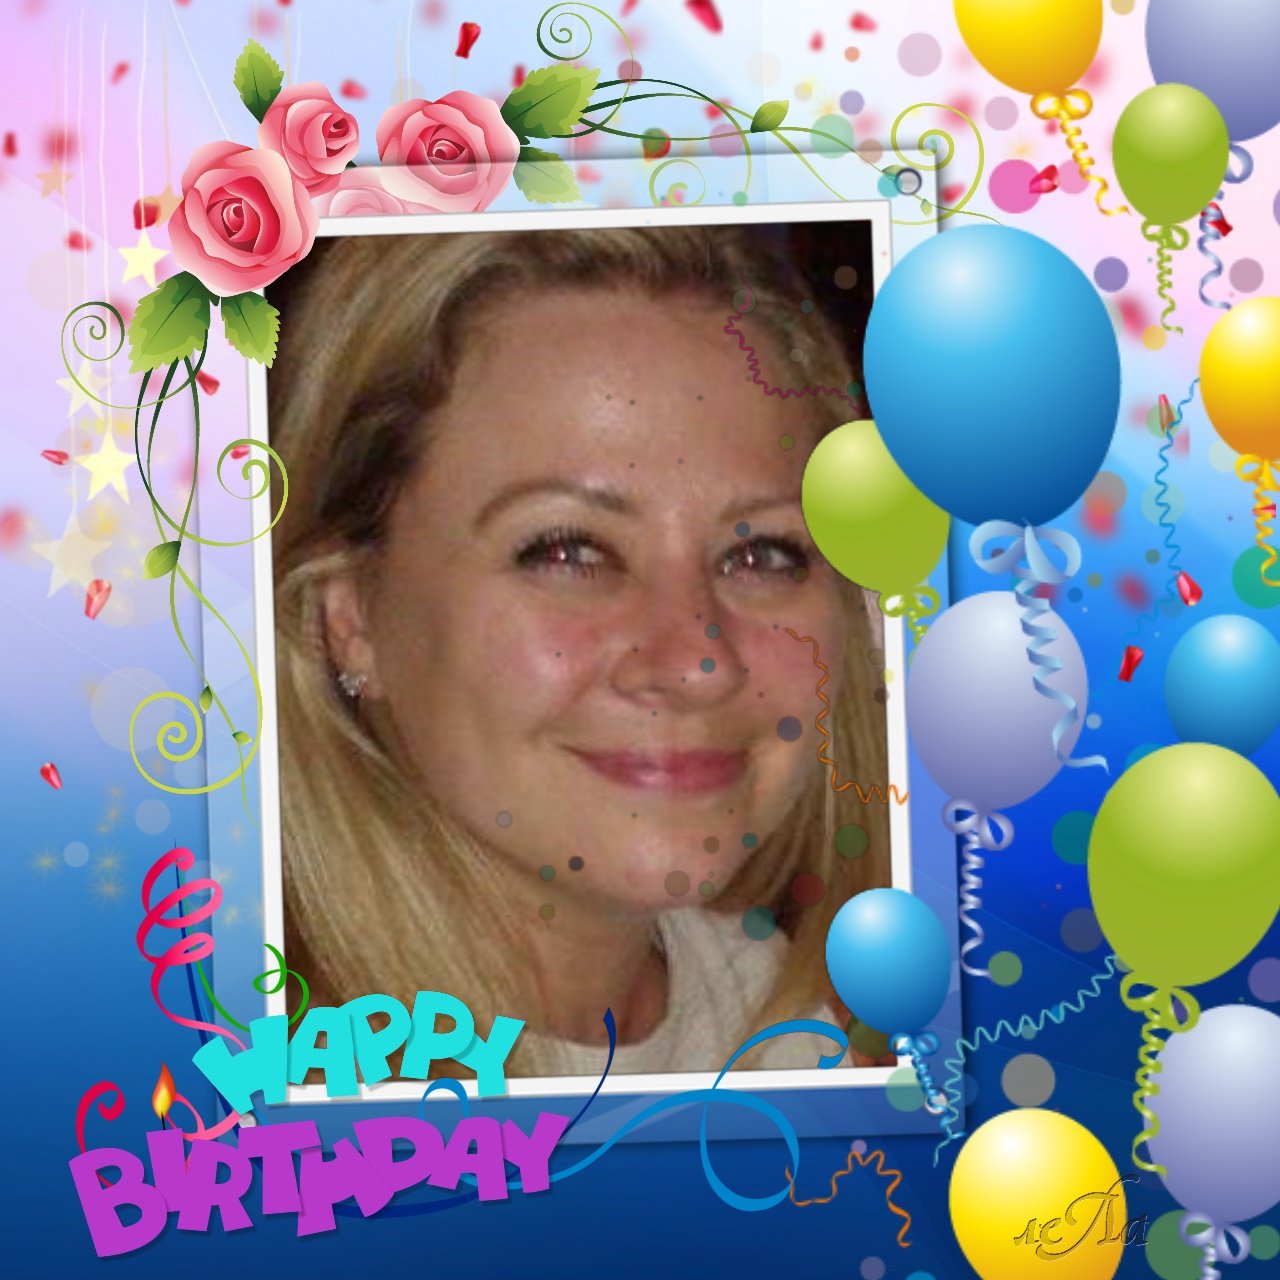 Wishing My friend Adele a very happy birthday today hope she has a great day xx 